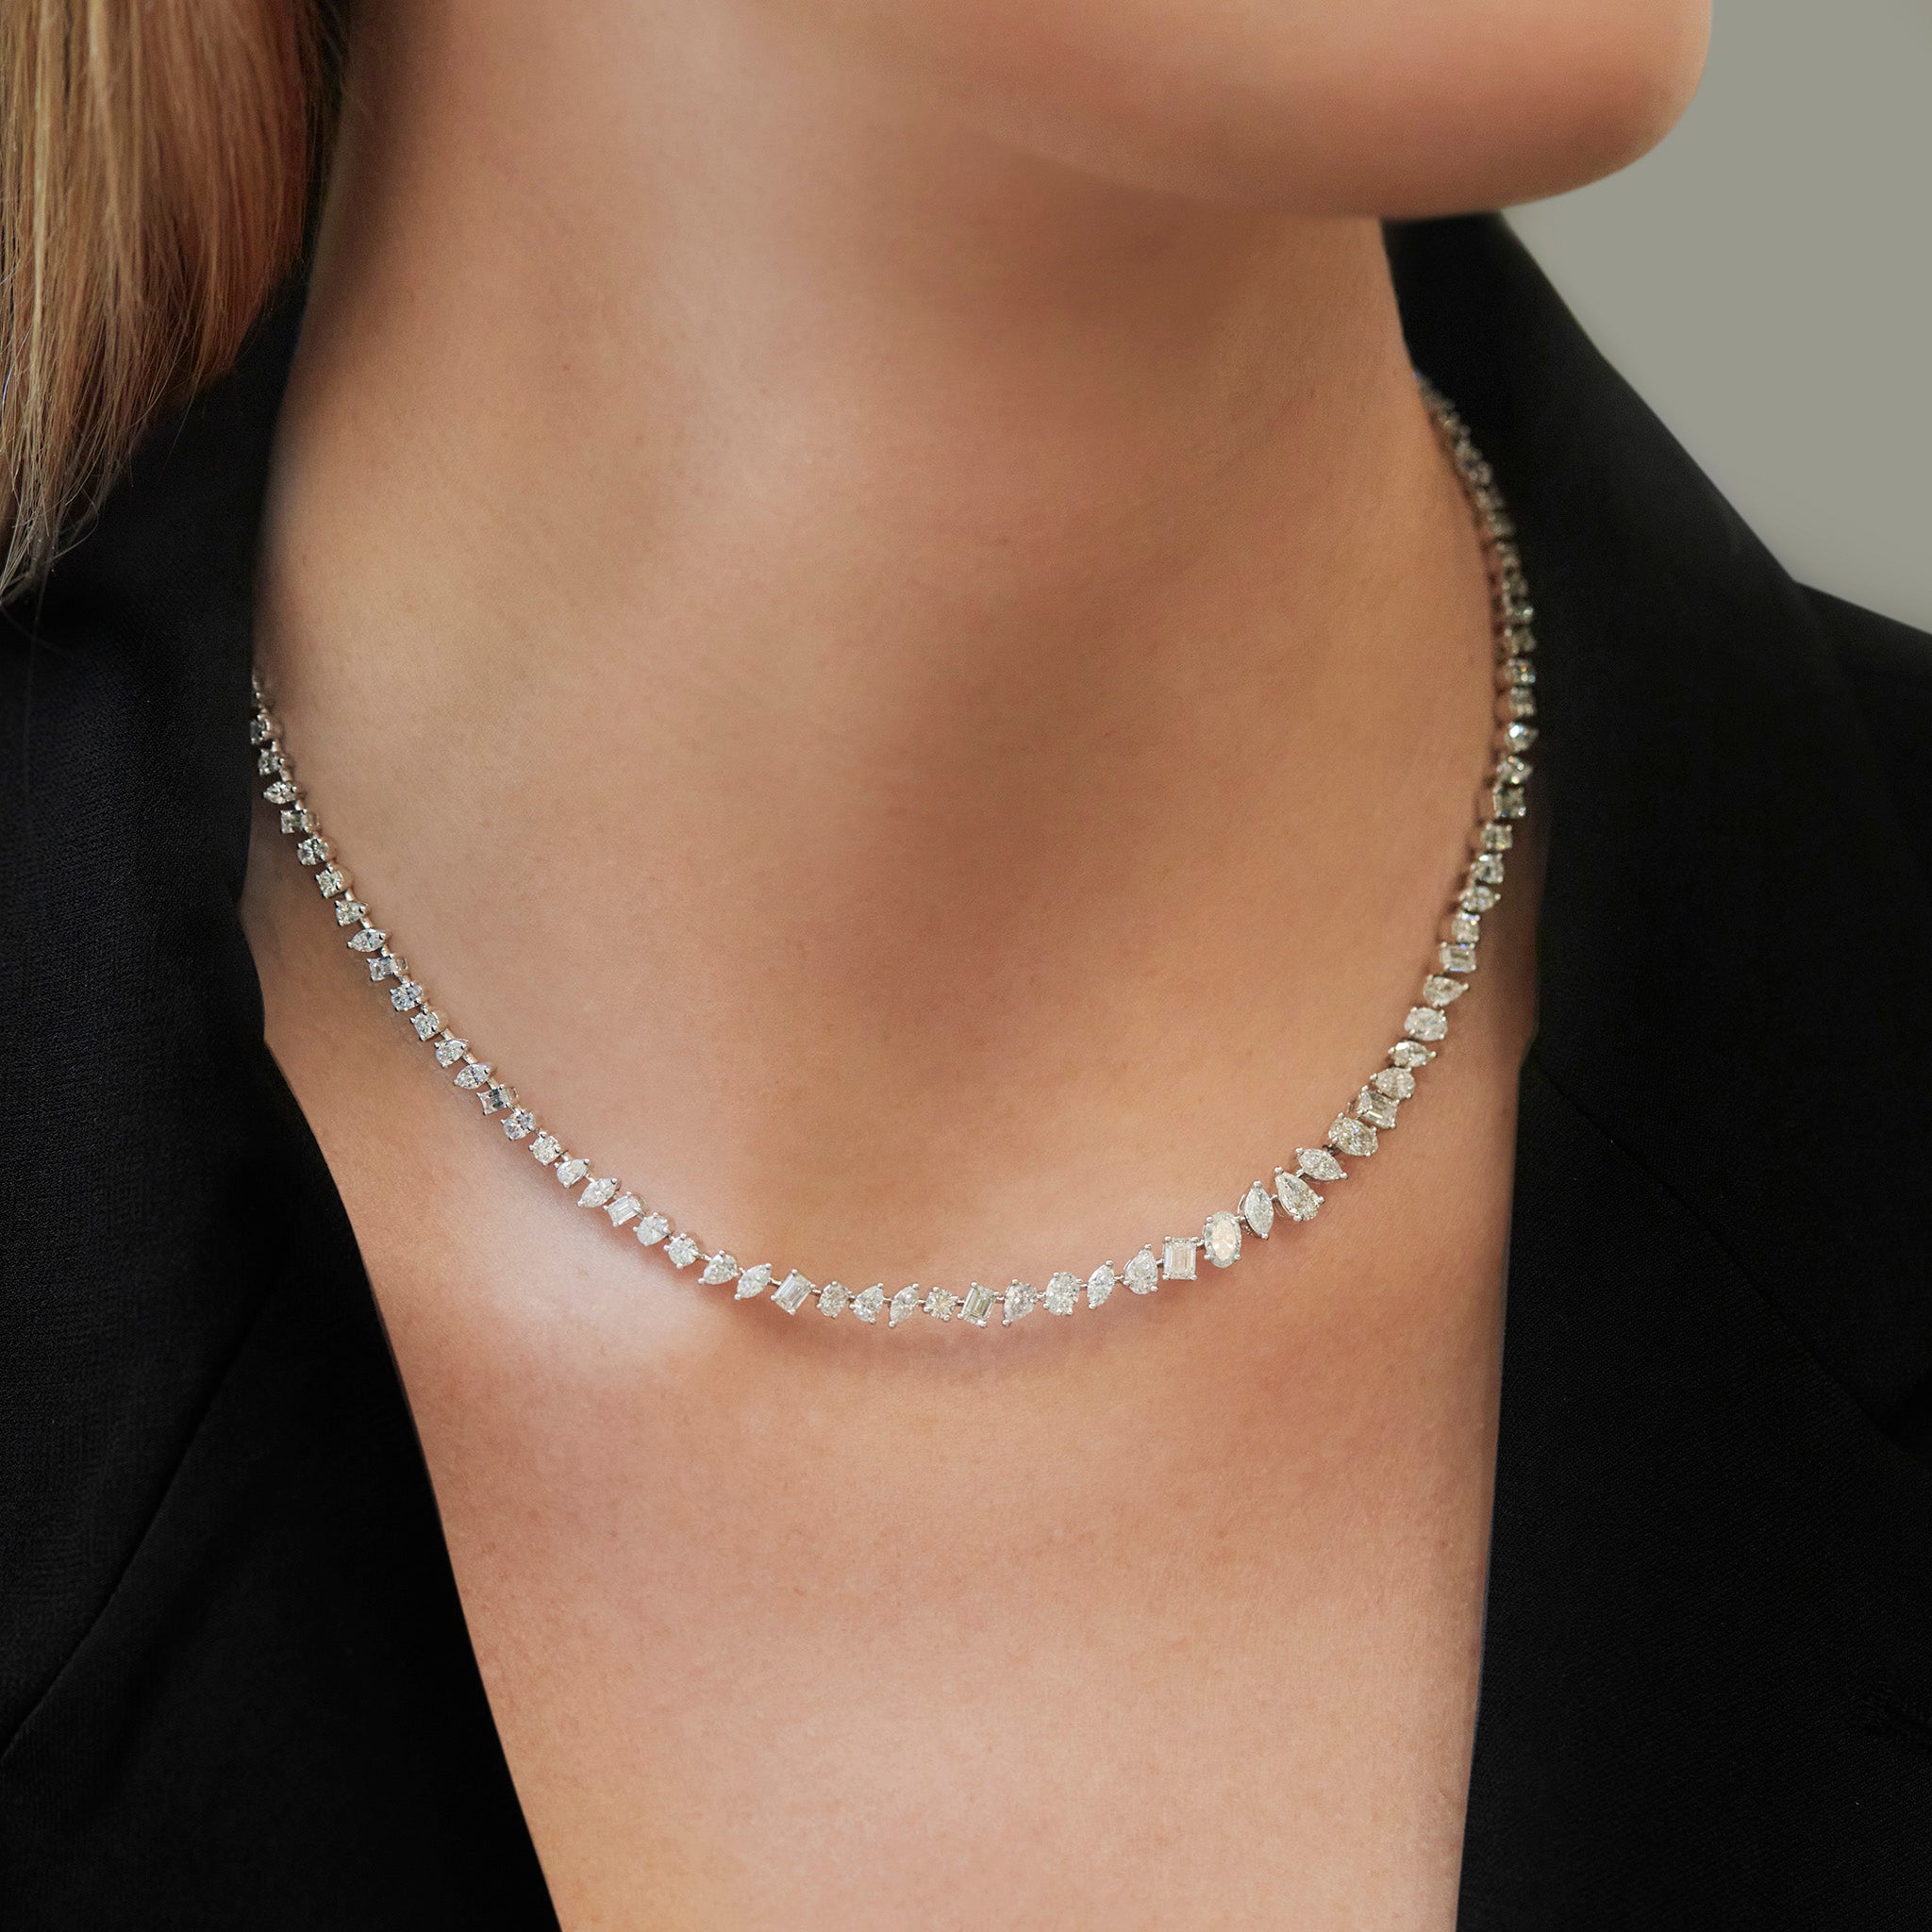 Diamond Tennis Necklace - The Clear Cut Collection